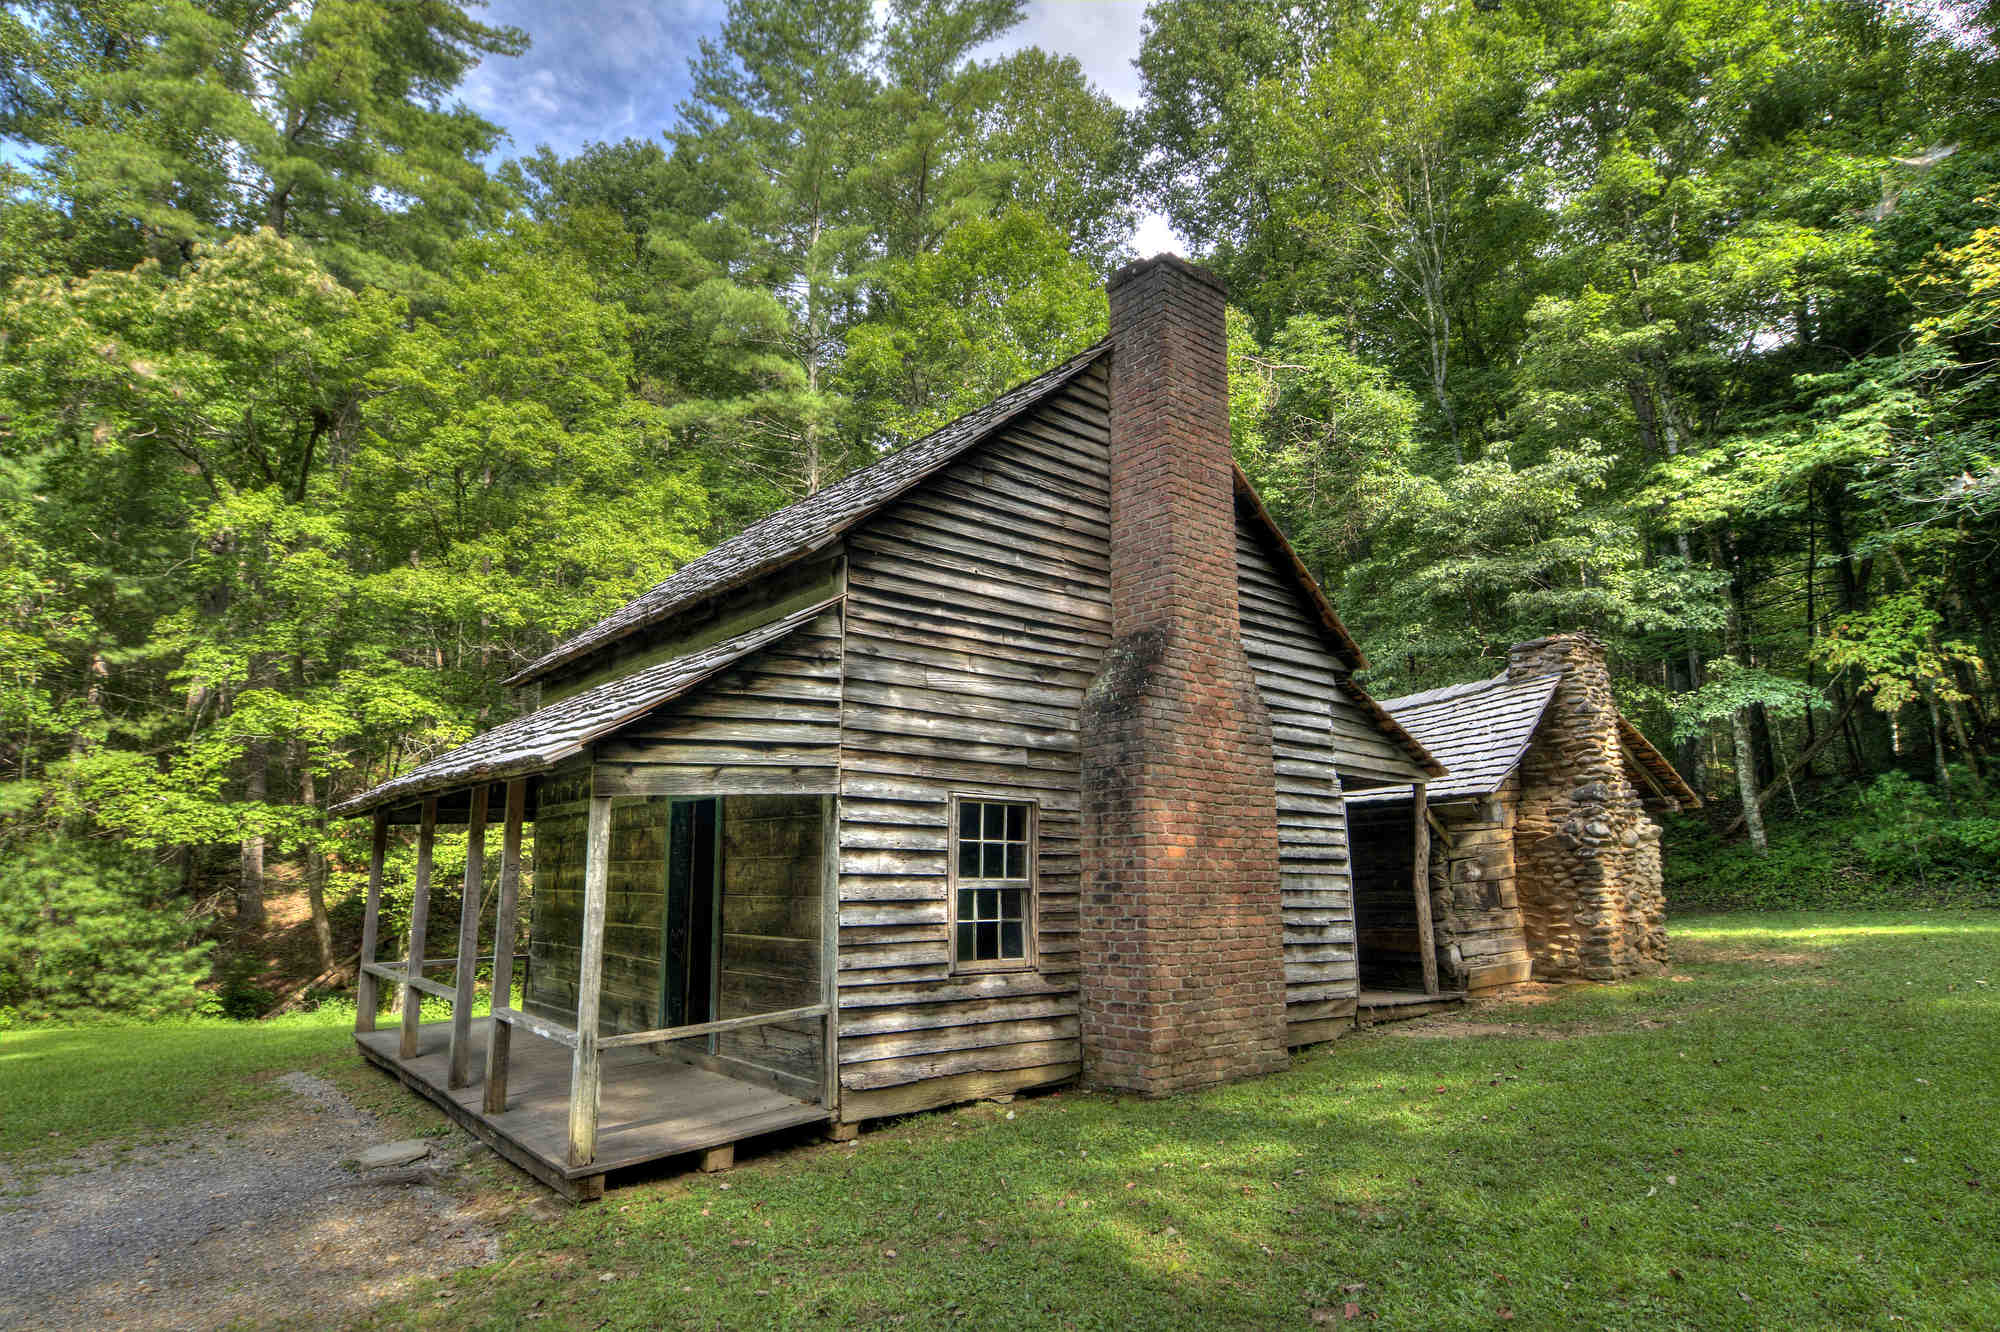 An old log cabin at the end of a gravel path in Cades Cove in Great Smoky Mountains National Park.